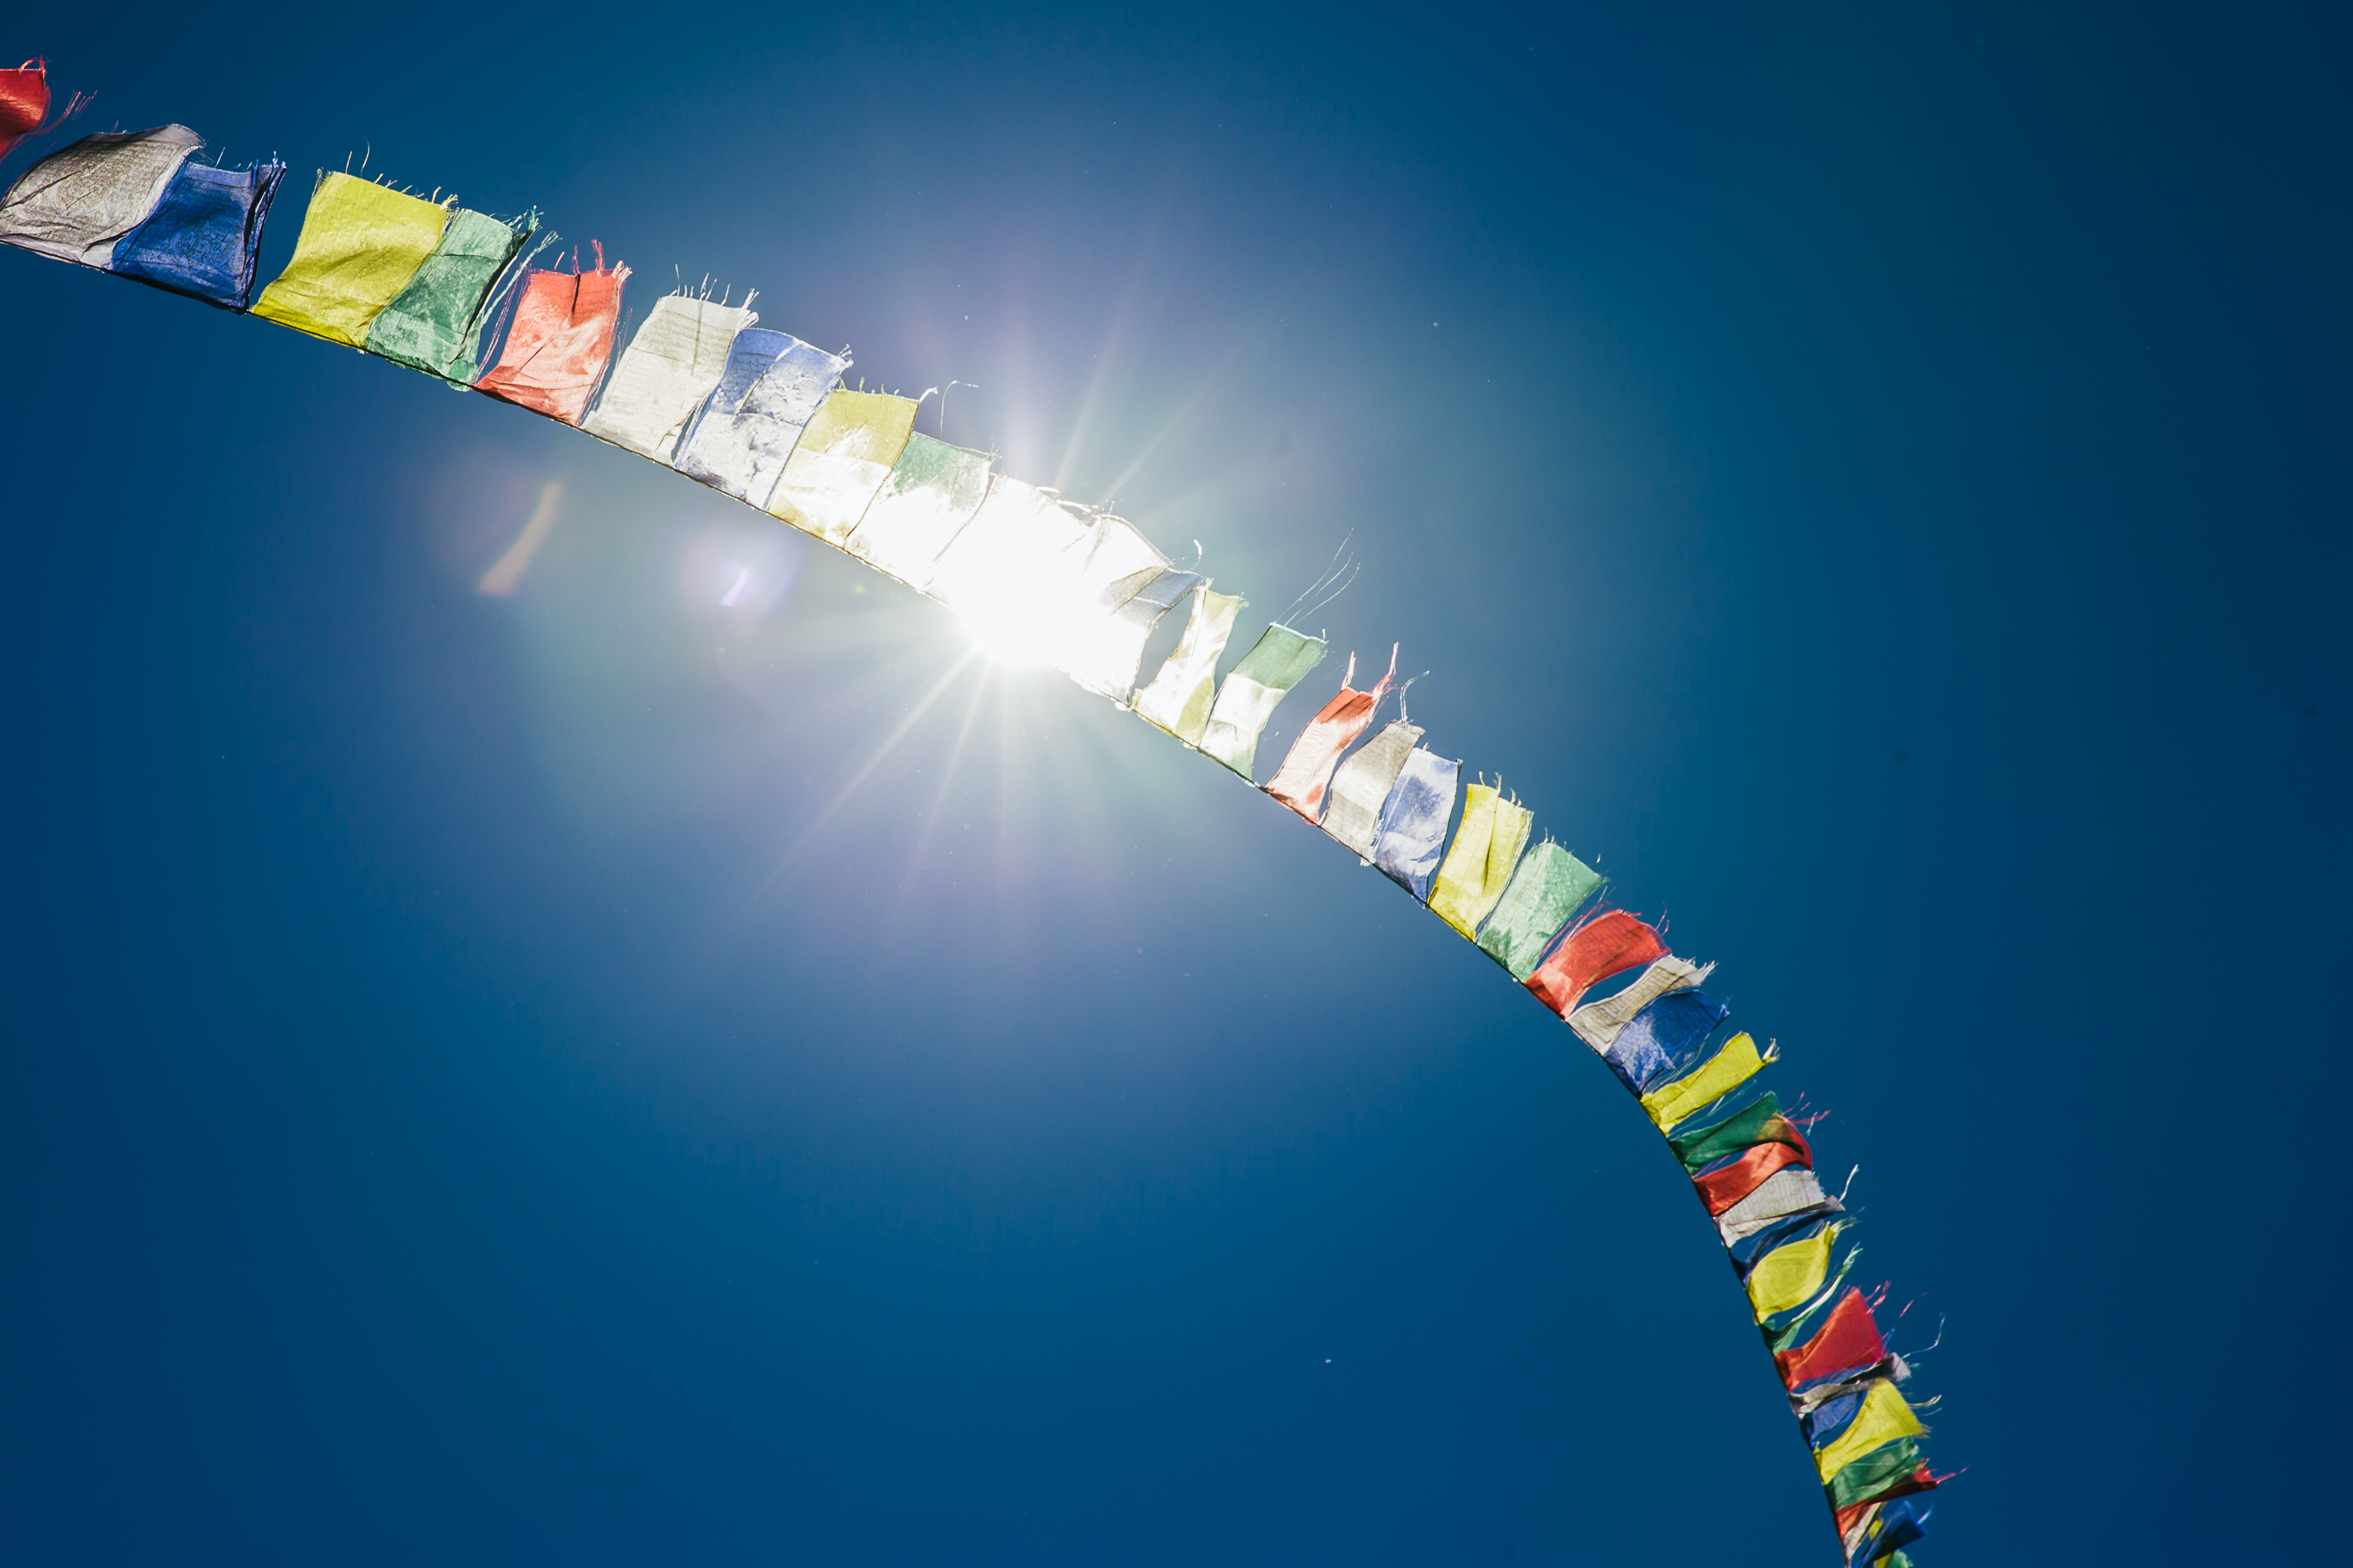 Buddhist prayer flags blowing in the blue sky